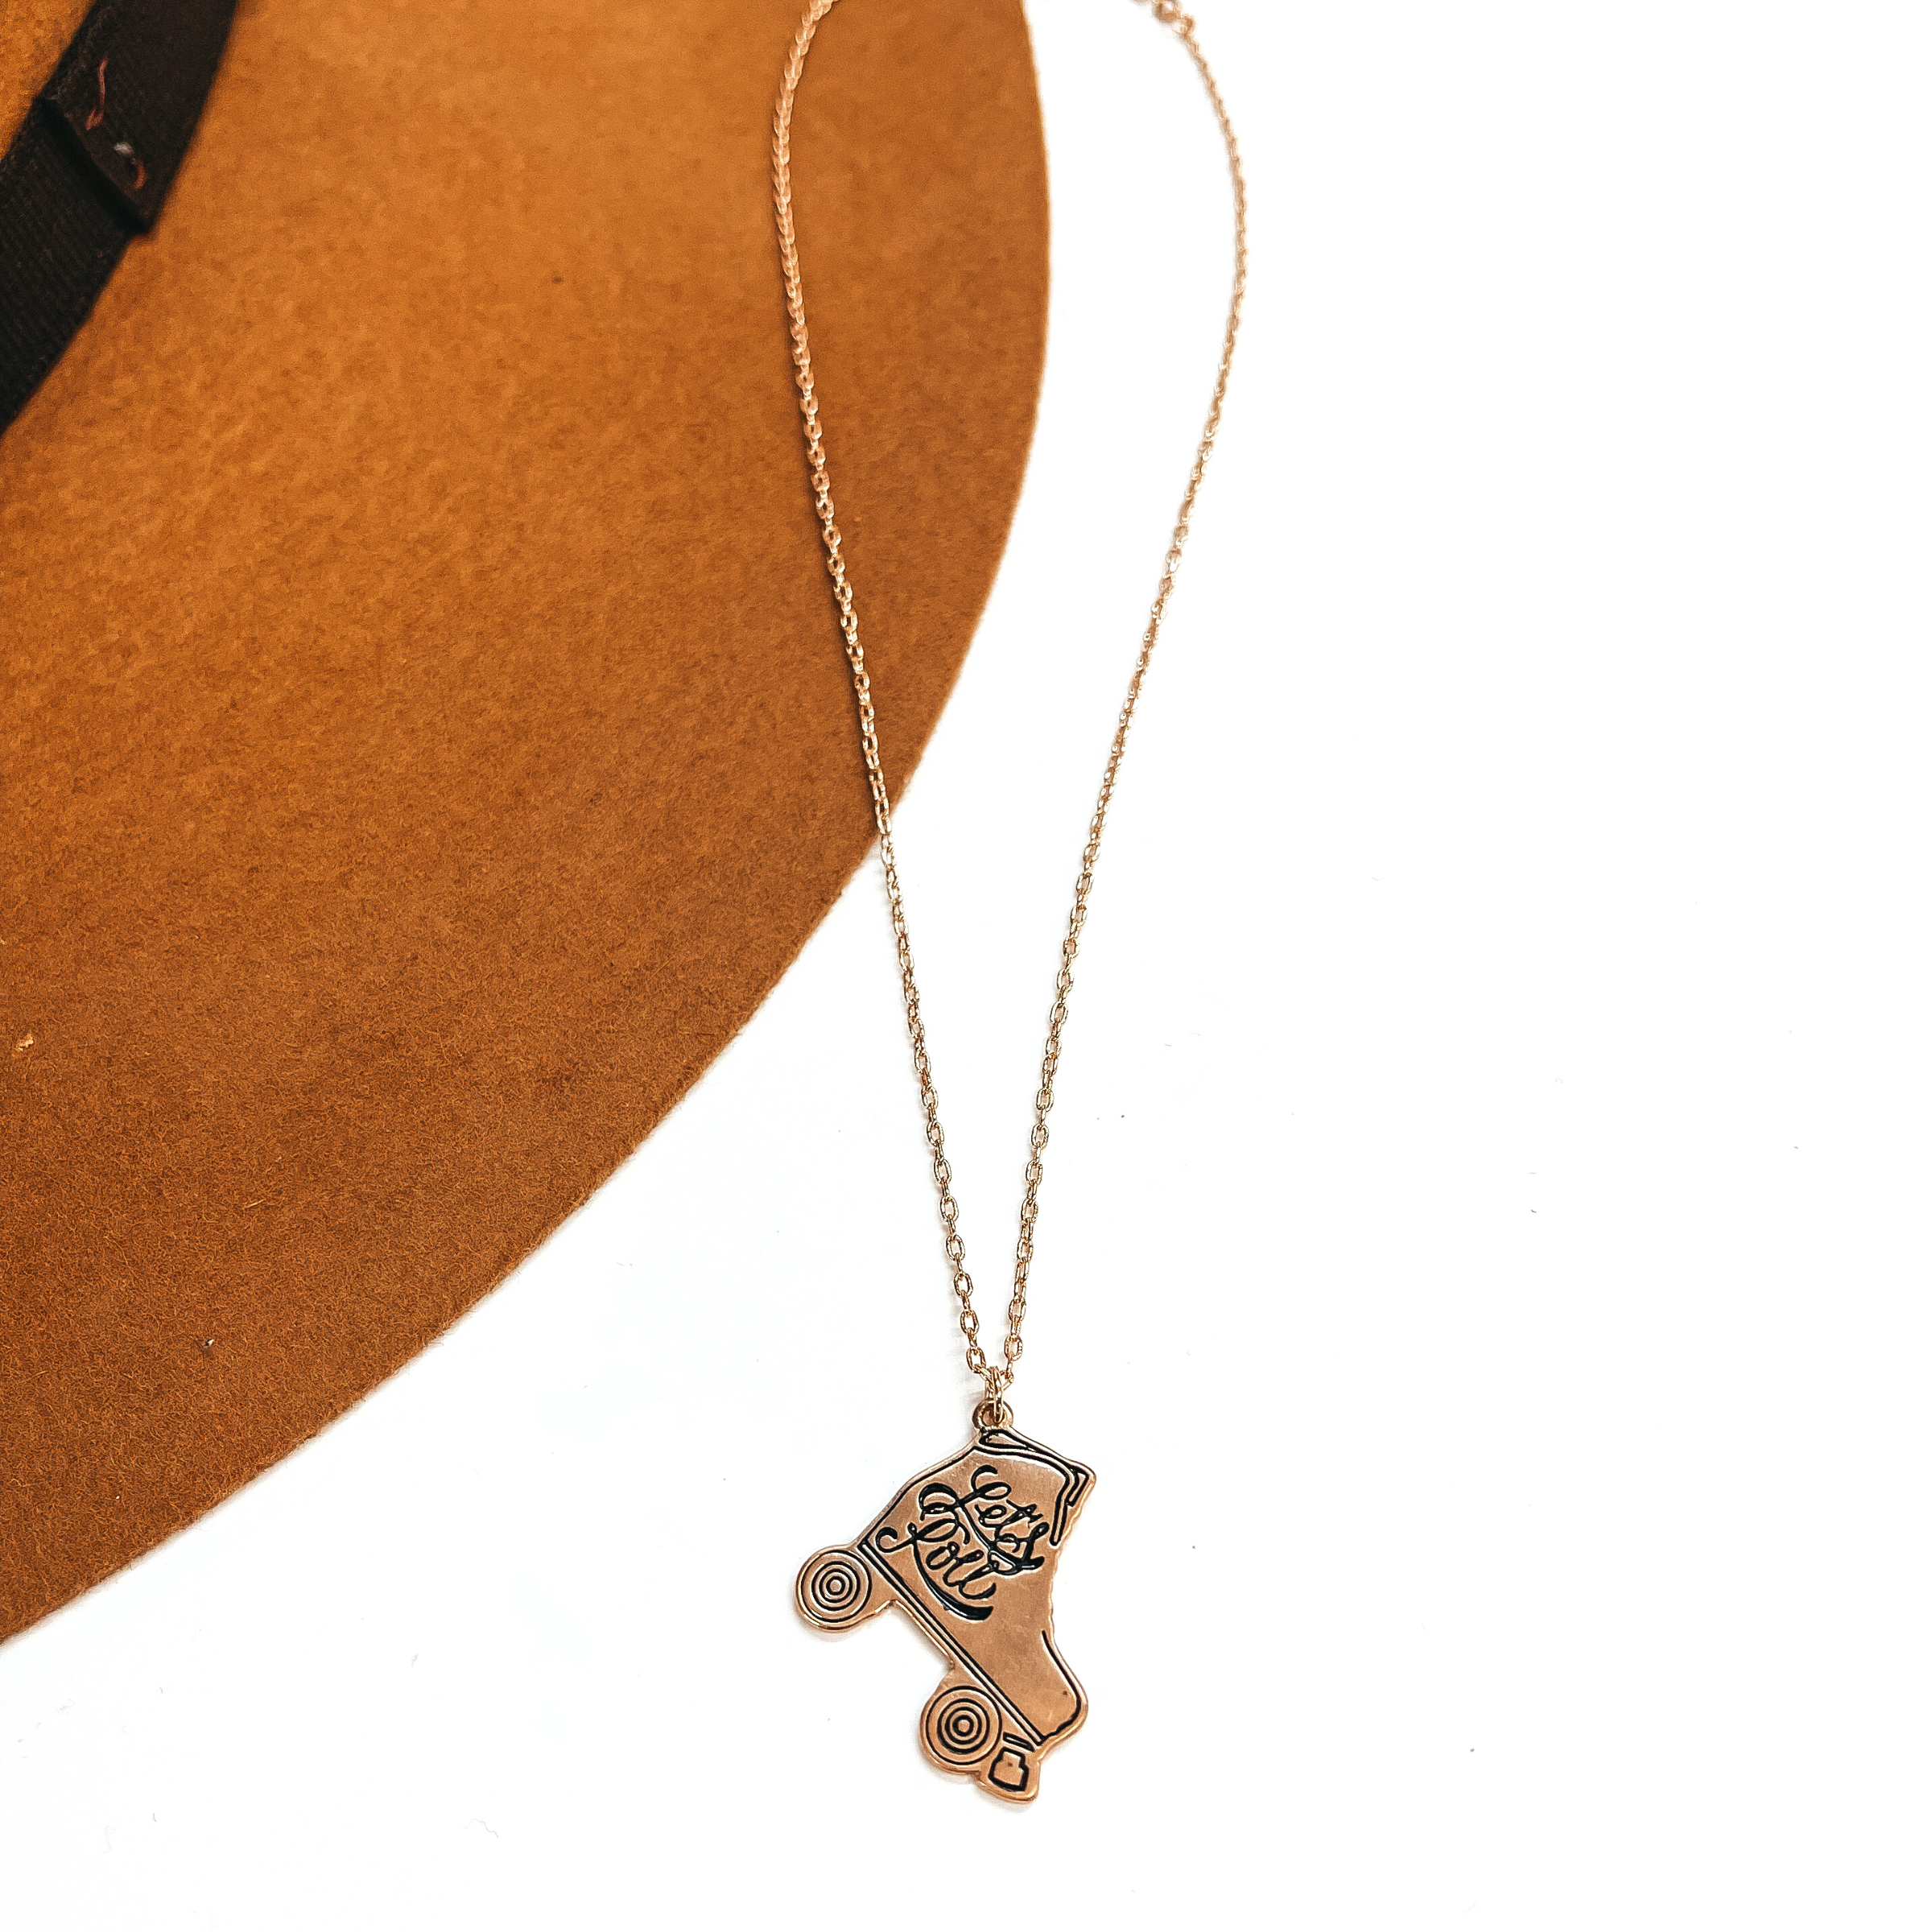 Let's Roll Gold Tone Necklace with Rollerskate Pendant - Giddy Up Glamour Boutique